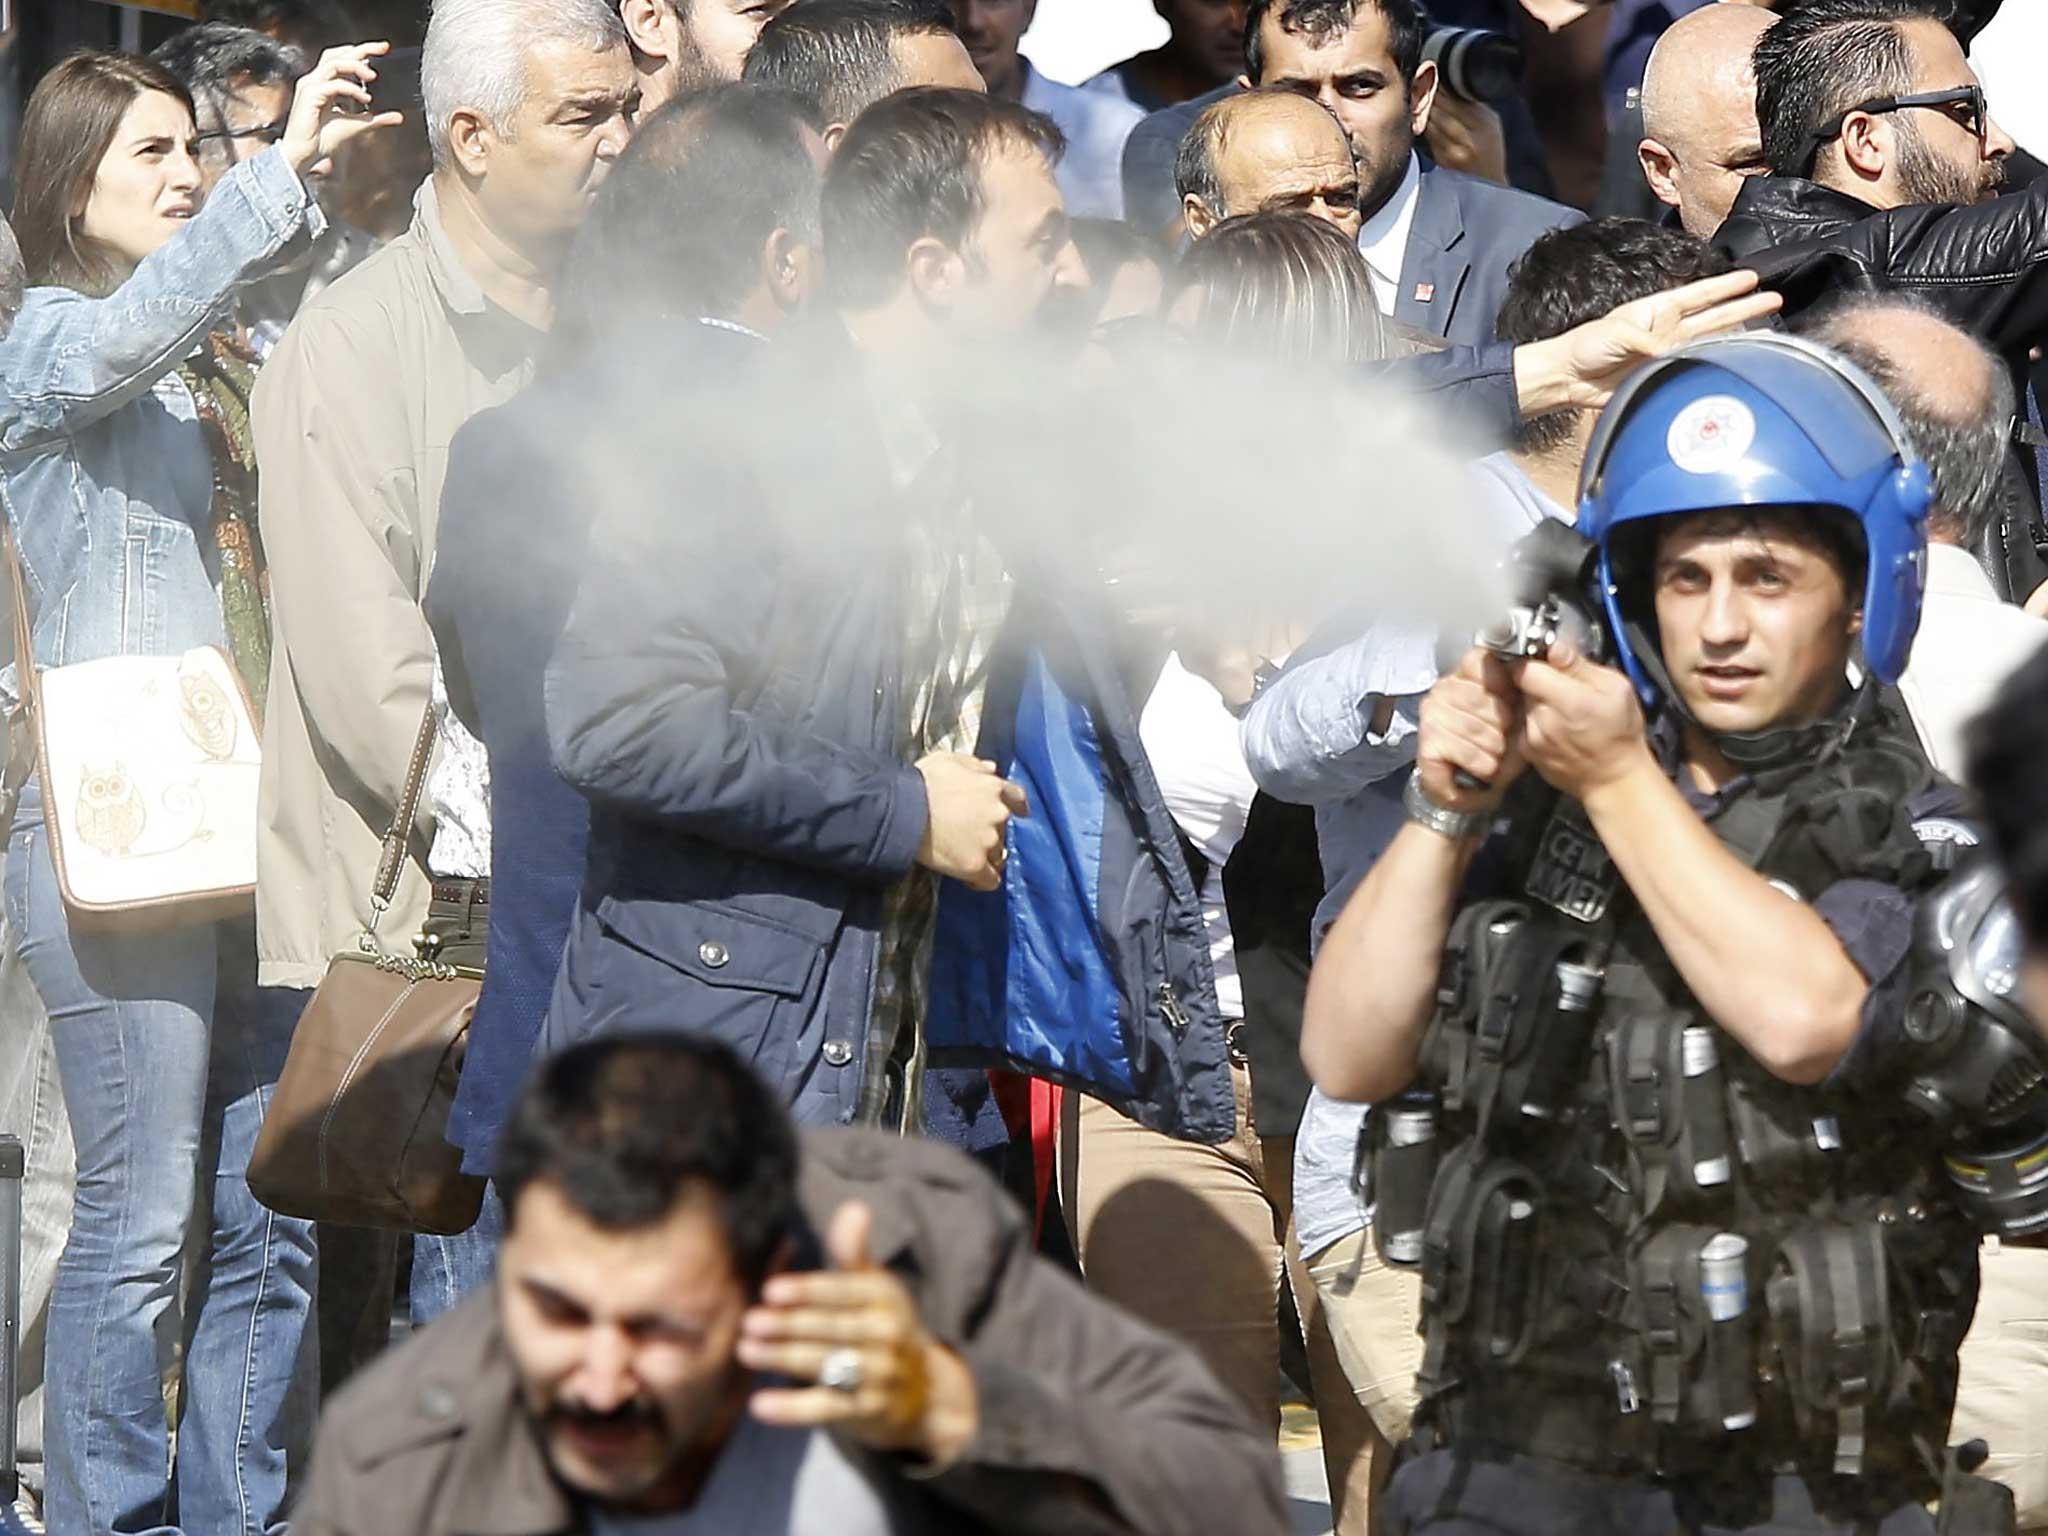 Turkish police use tear gas spray to disperse the crowd during the commemoration of the 1st anniversary of Ankara bombings of 2015